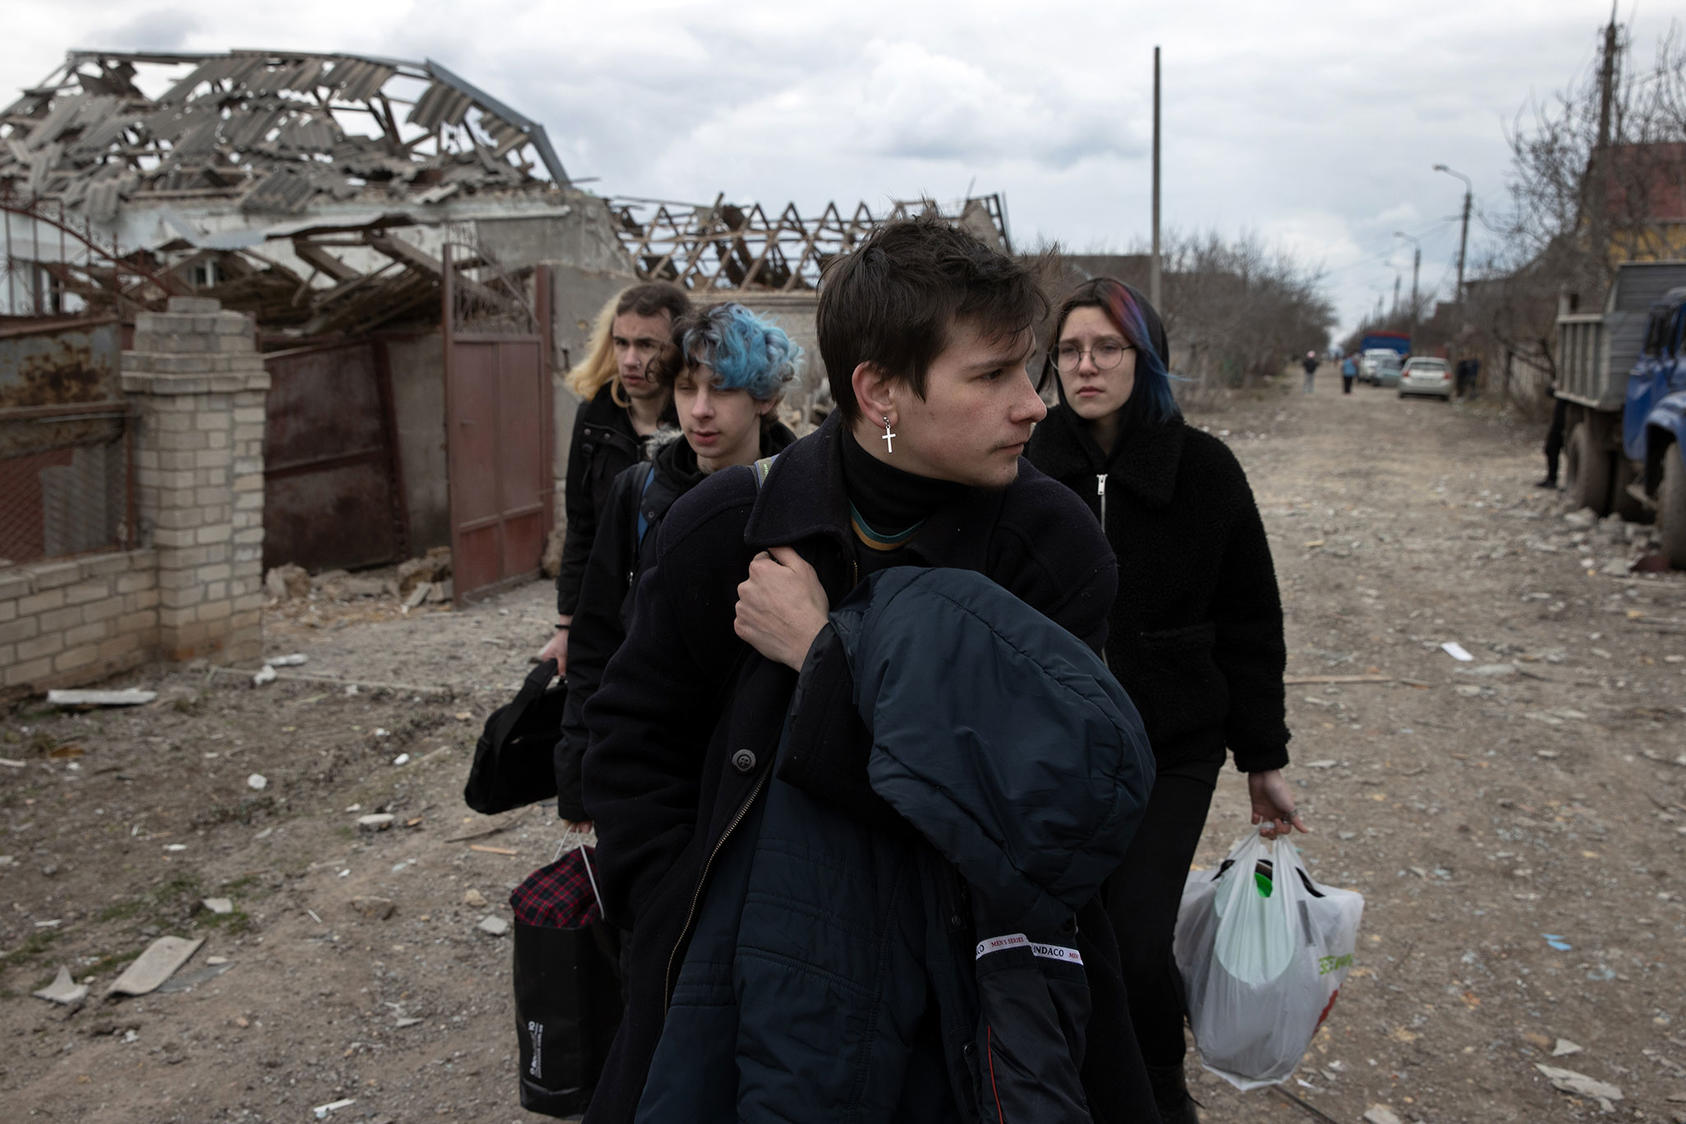 Ukrainians leave home in the village of Ternovka, southern Ukraine, March 8 after it was struck by Russian forces. War crimes investigators are gathering details on the pattern of Russian attacks on civilian targets. (Tyler Hicks/The New York Times)